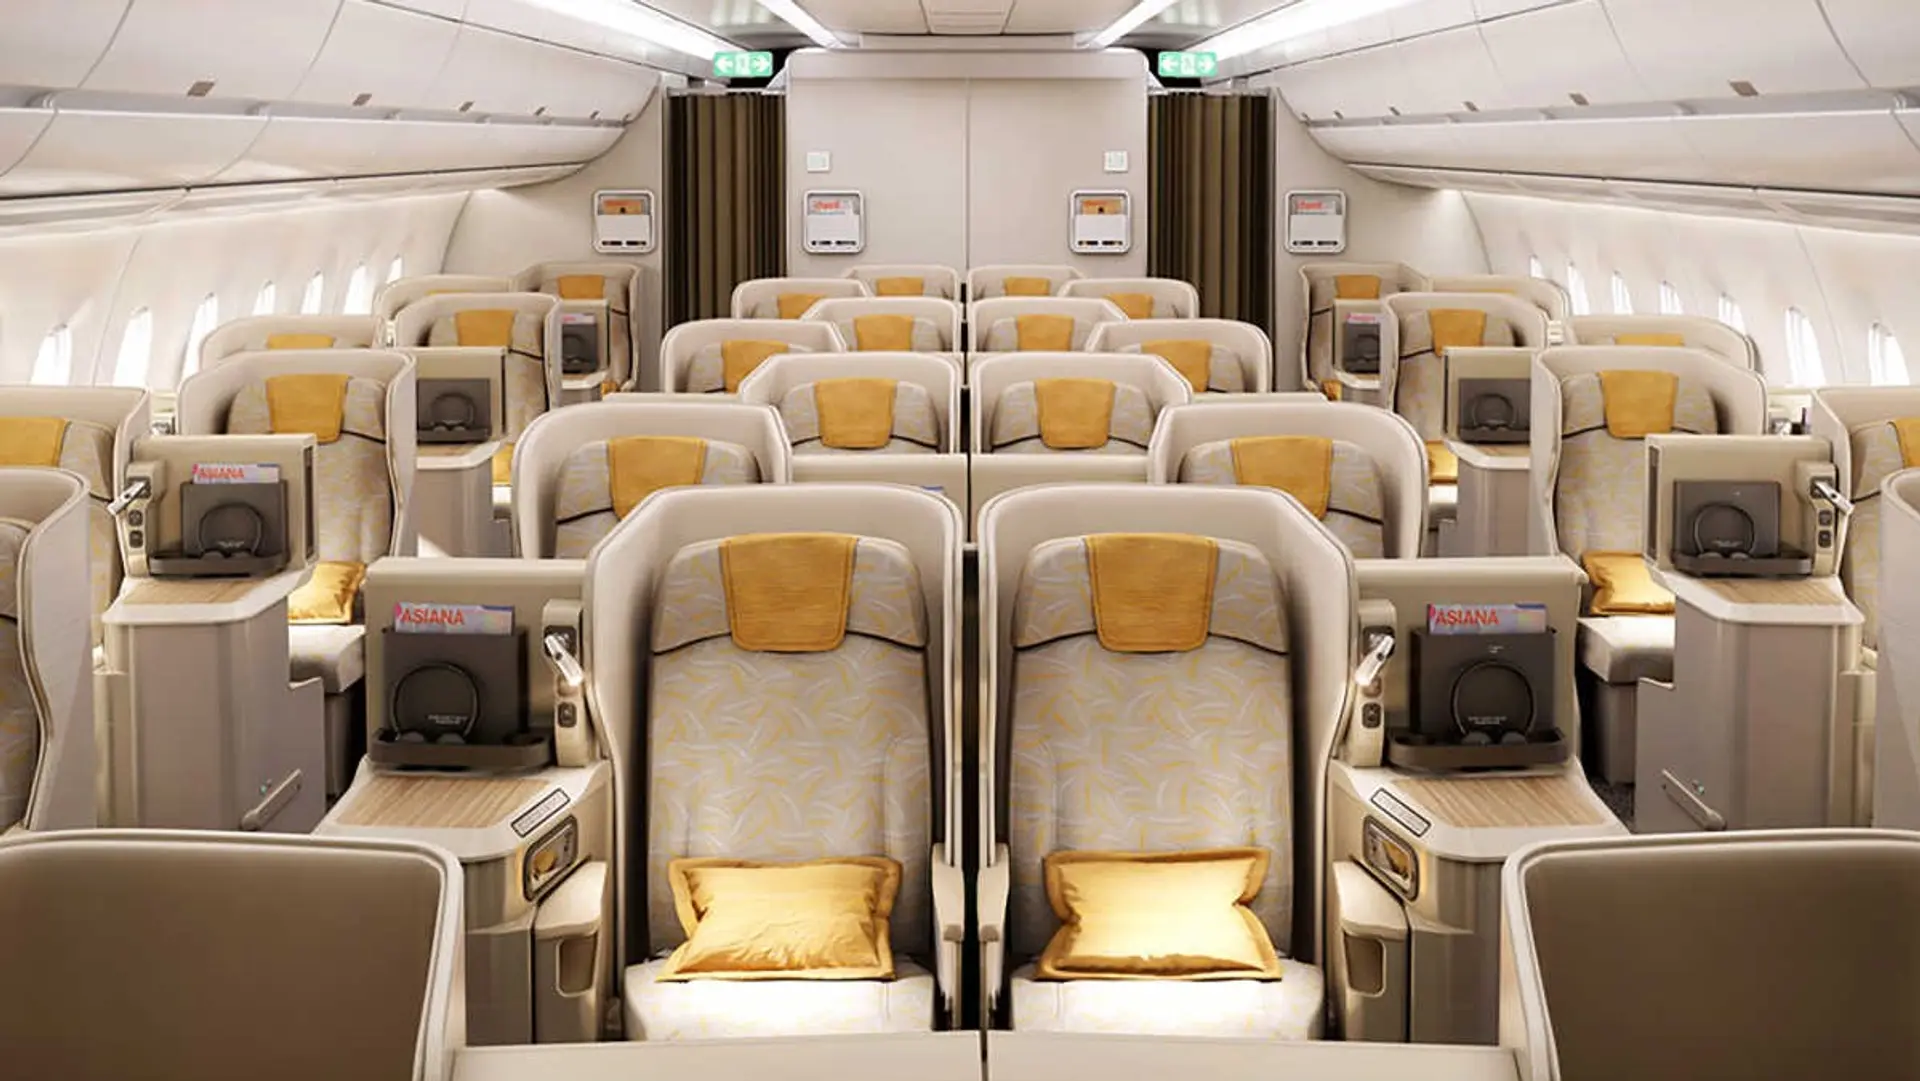 Airline review Cabin & Seat - Asiana - 3